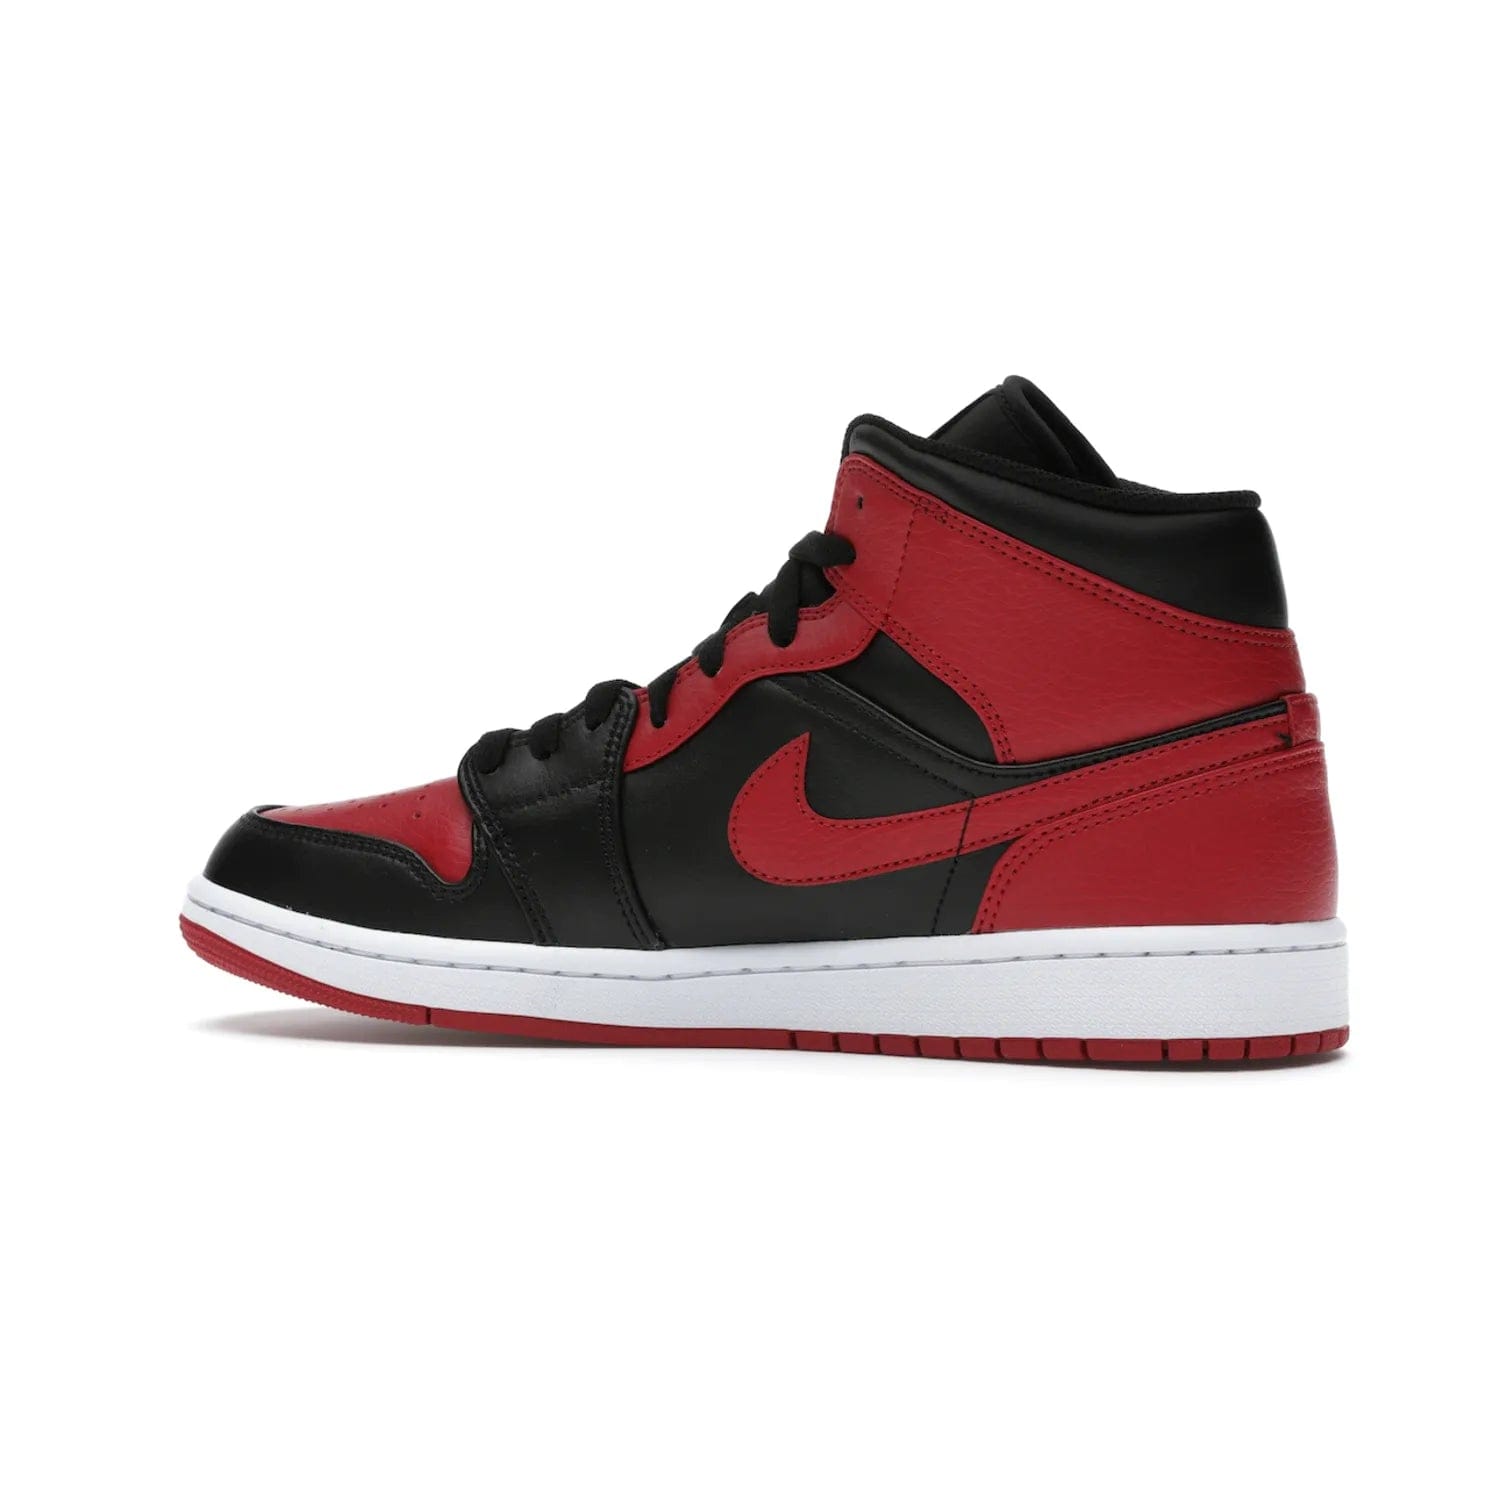 Jordan 1 Mid Banned (2020) - Image 21 - Only at www.BallersClubKickz.com - The Air Jordan 1 Mid Banned (2020) brings a modern twist to the classic Banned colorway. Features full-grain black and red leather uppers, red leather around the toe, collar, heel, & Swoosh. Release November 2021 for $110.